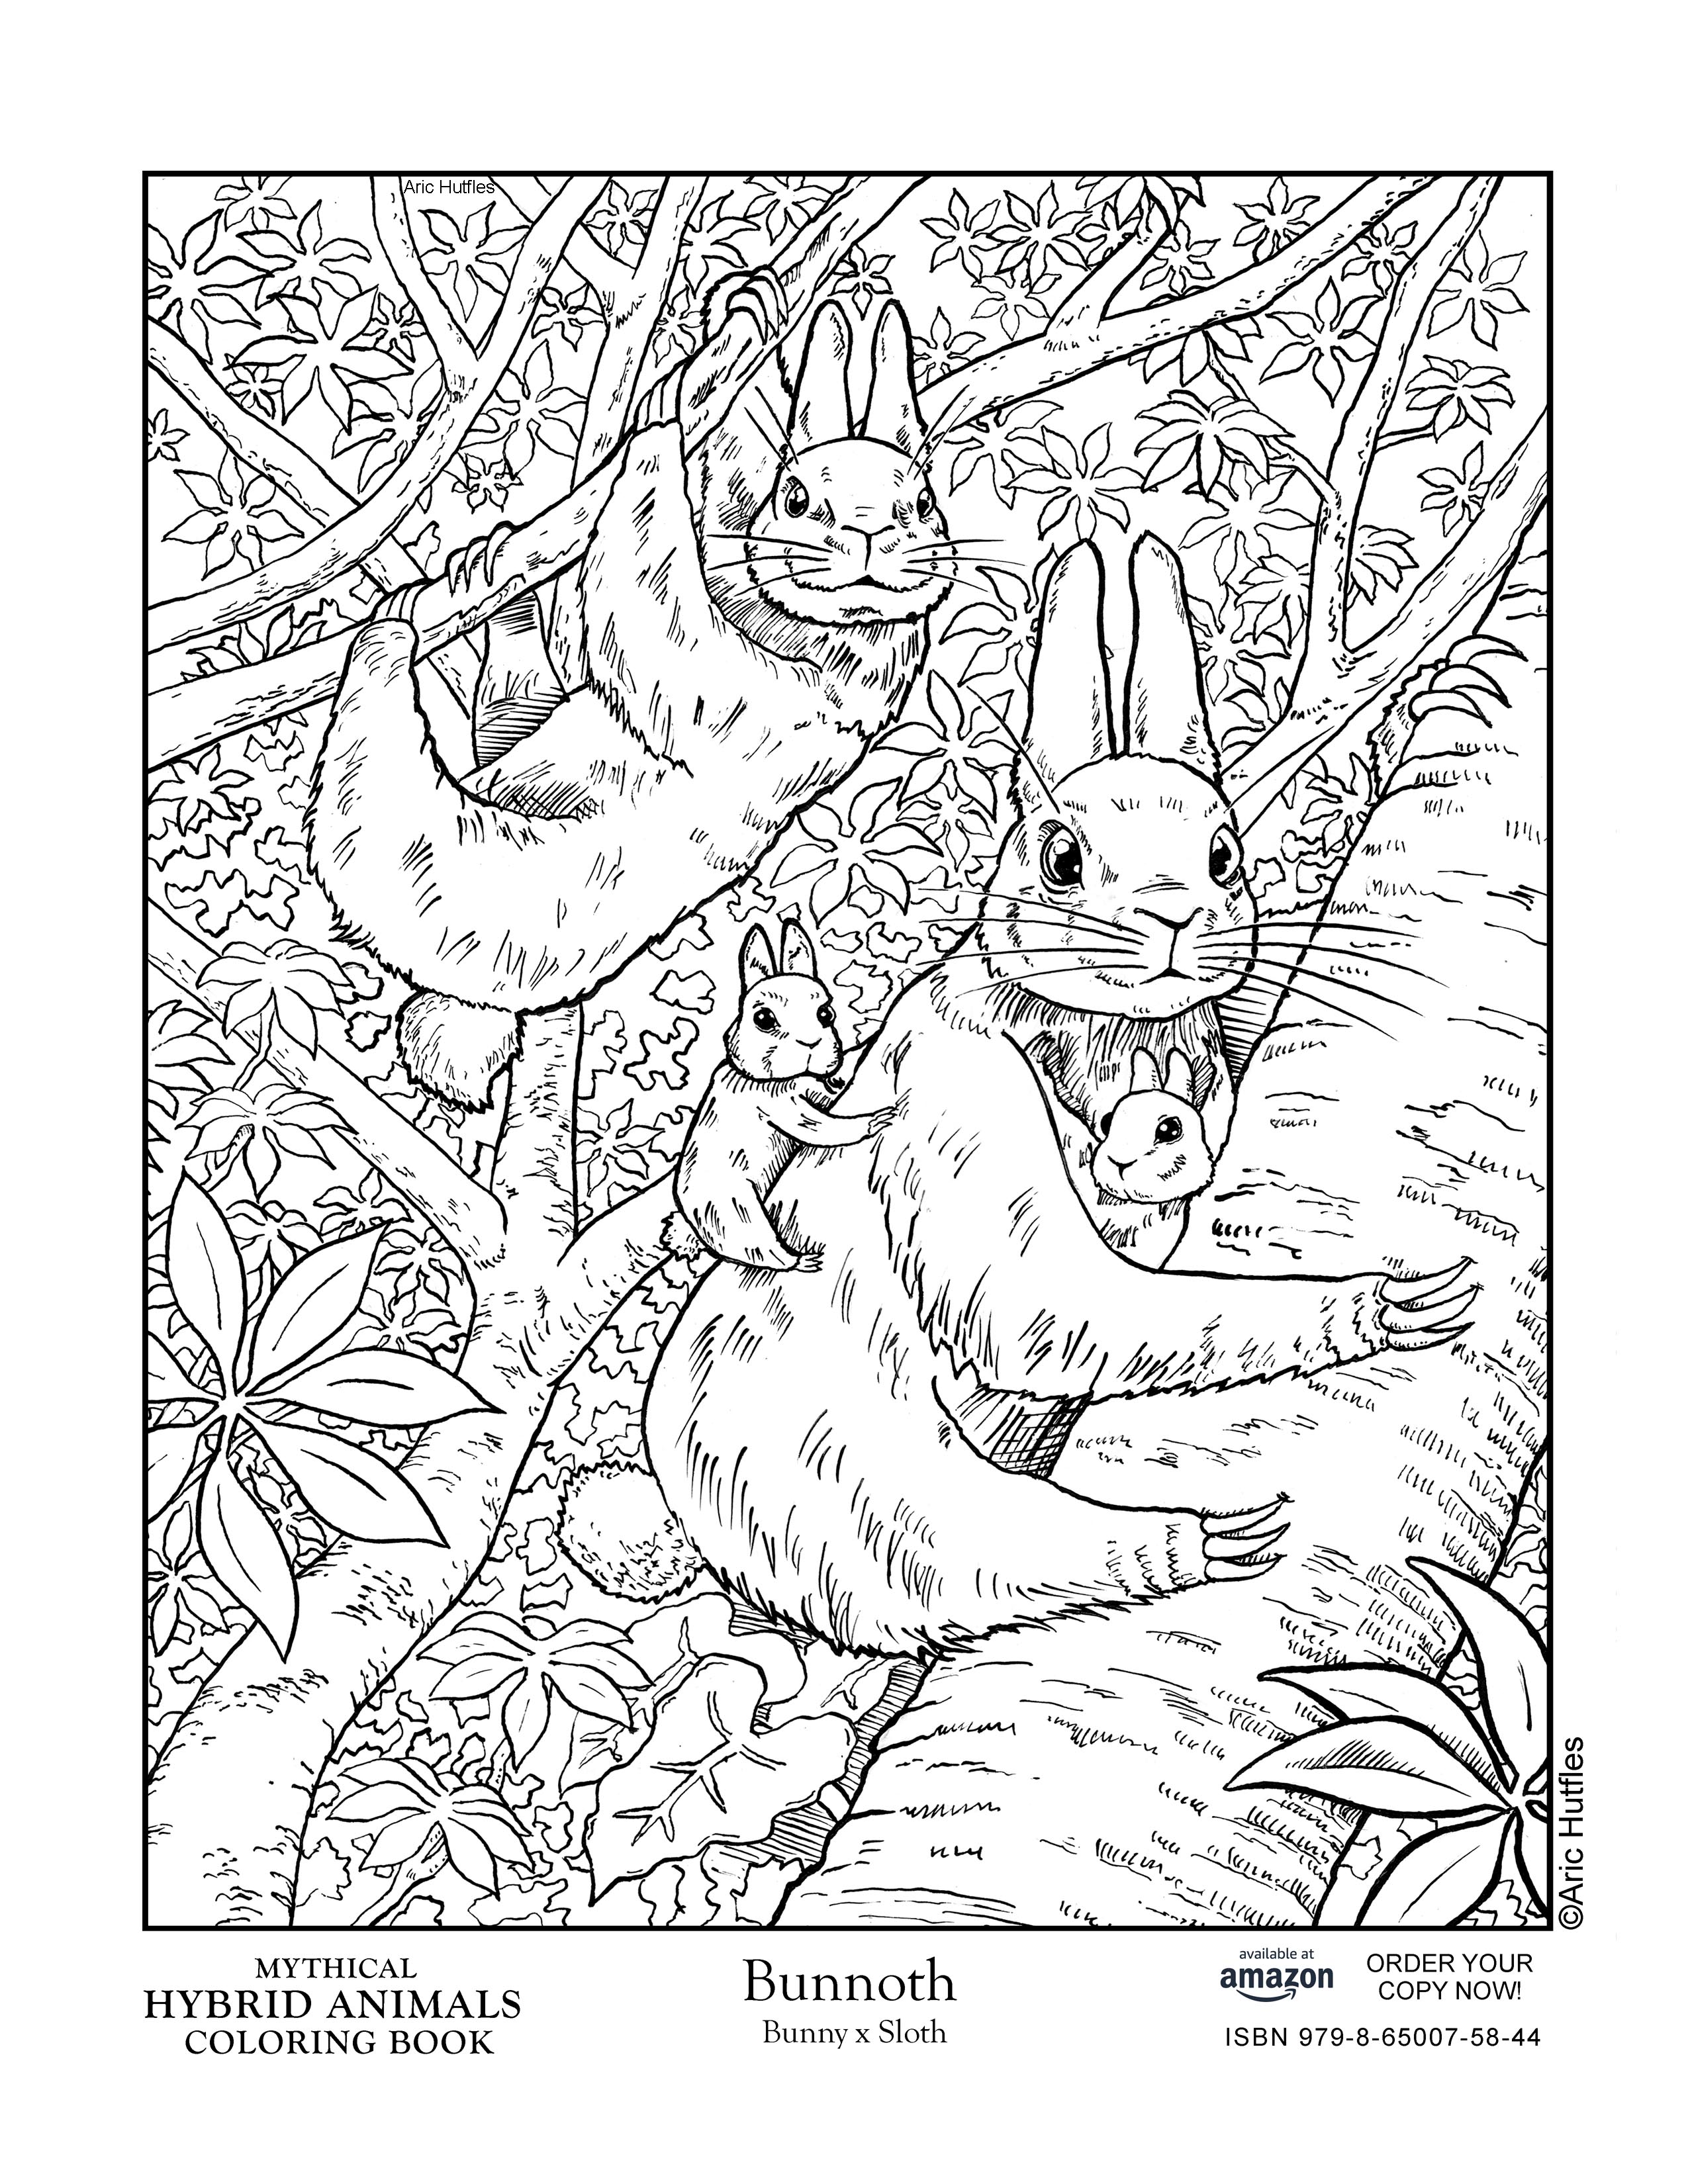 Coloring pages â mythical hybrid animals